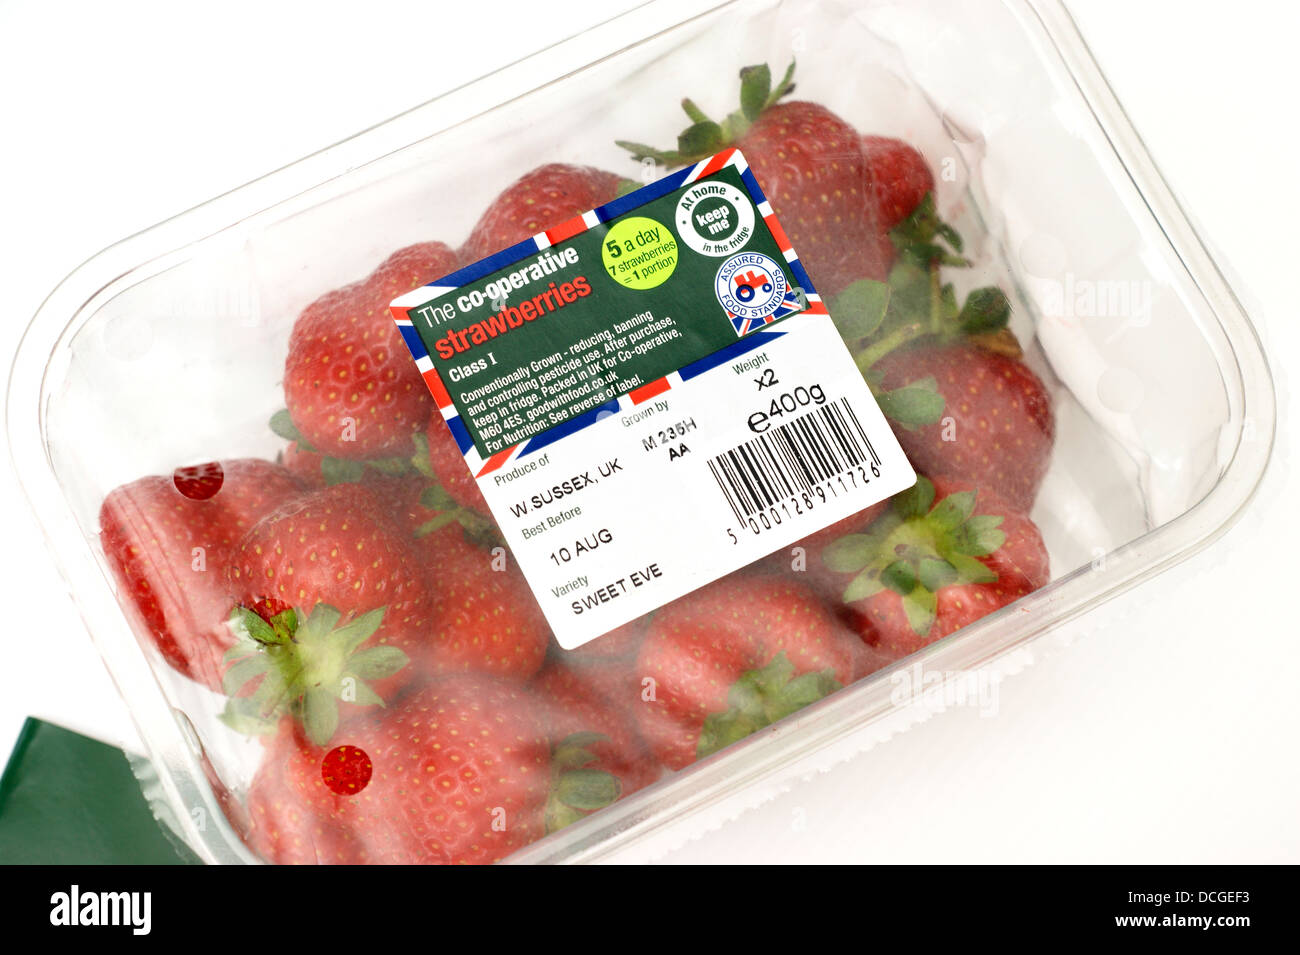 Co - operative strawberries (sweet eve) summer fruits showing the 5 a day British & little red tractor logos Stock Photo